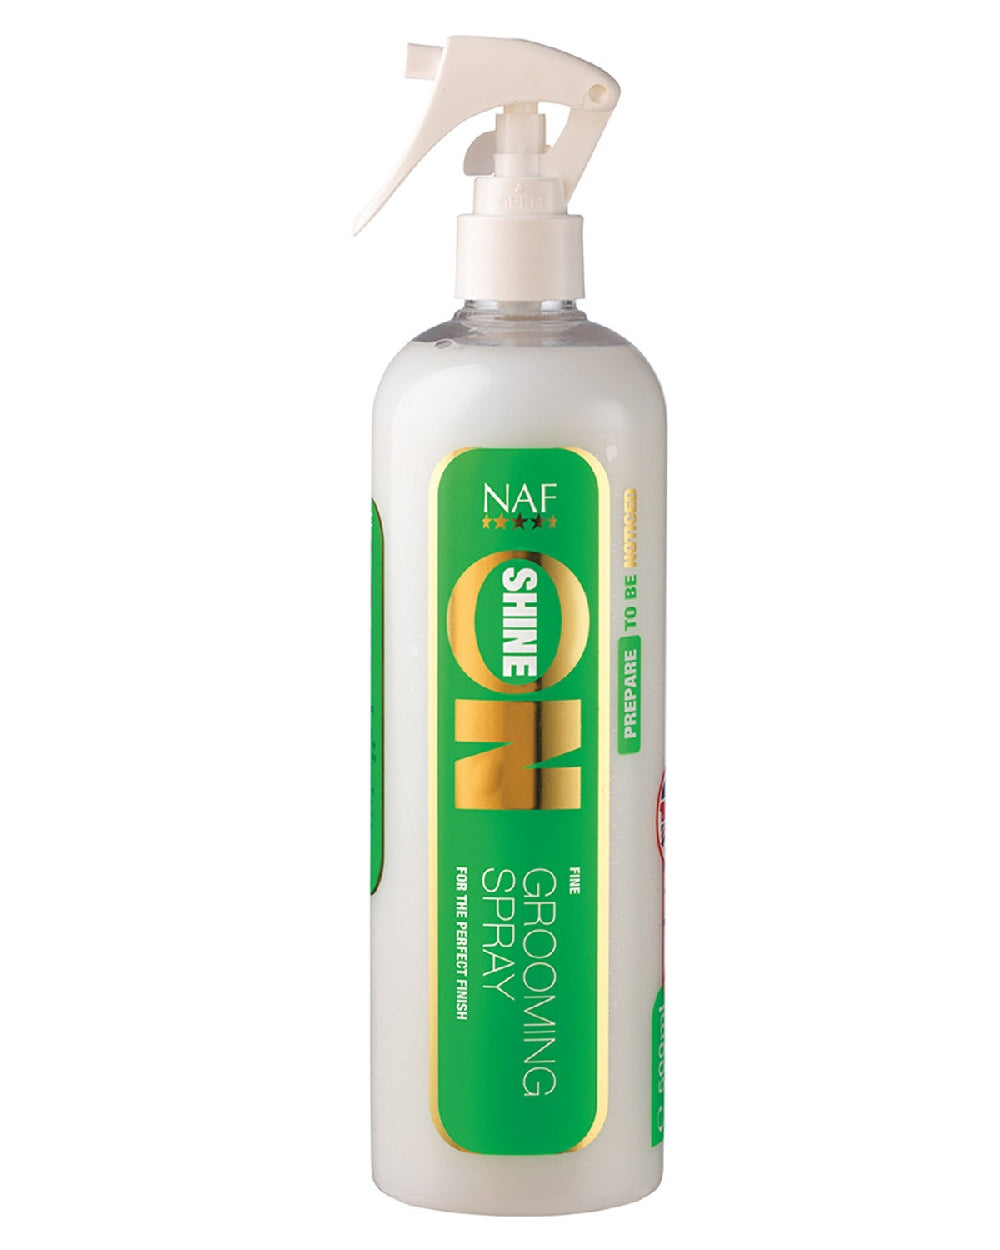 NAF Shine On Grooming Spray 500ml on white background